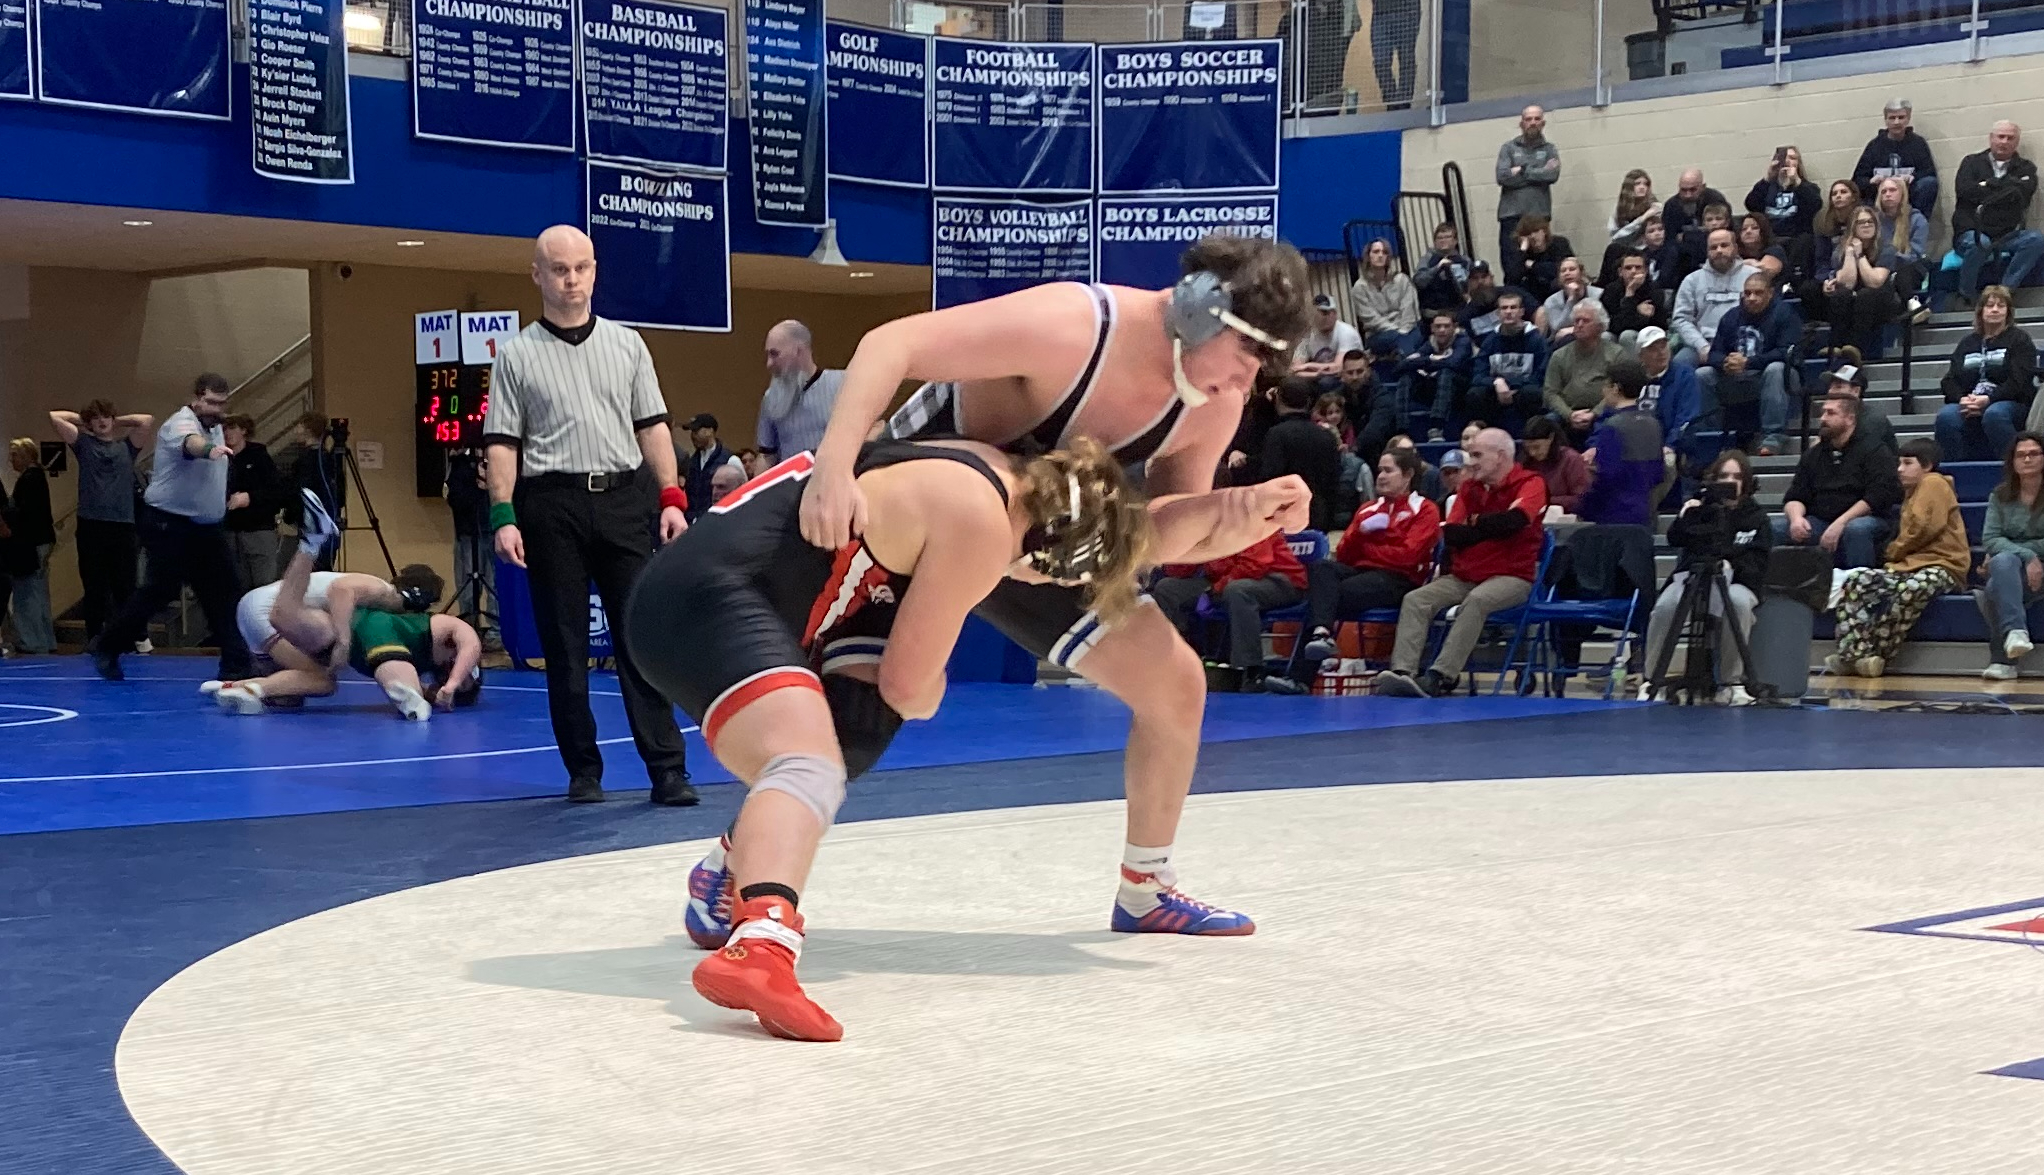 Trojans&rsquo; Aiden Hight places 3rd in PIAA